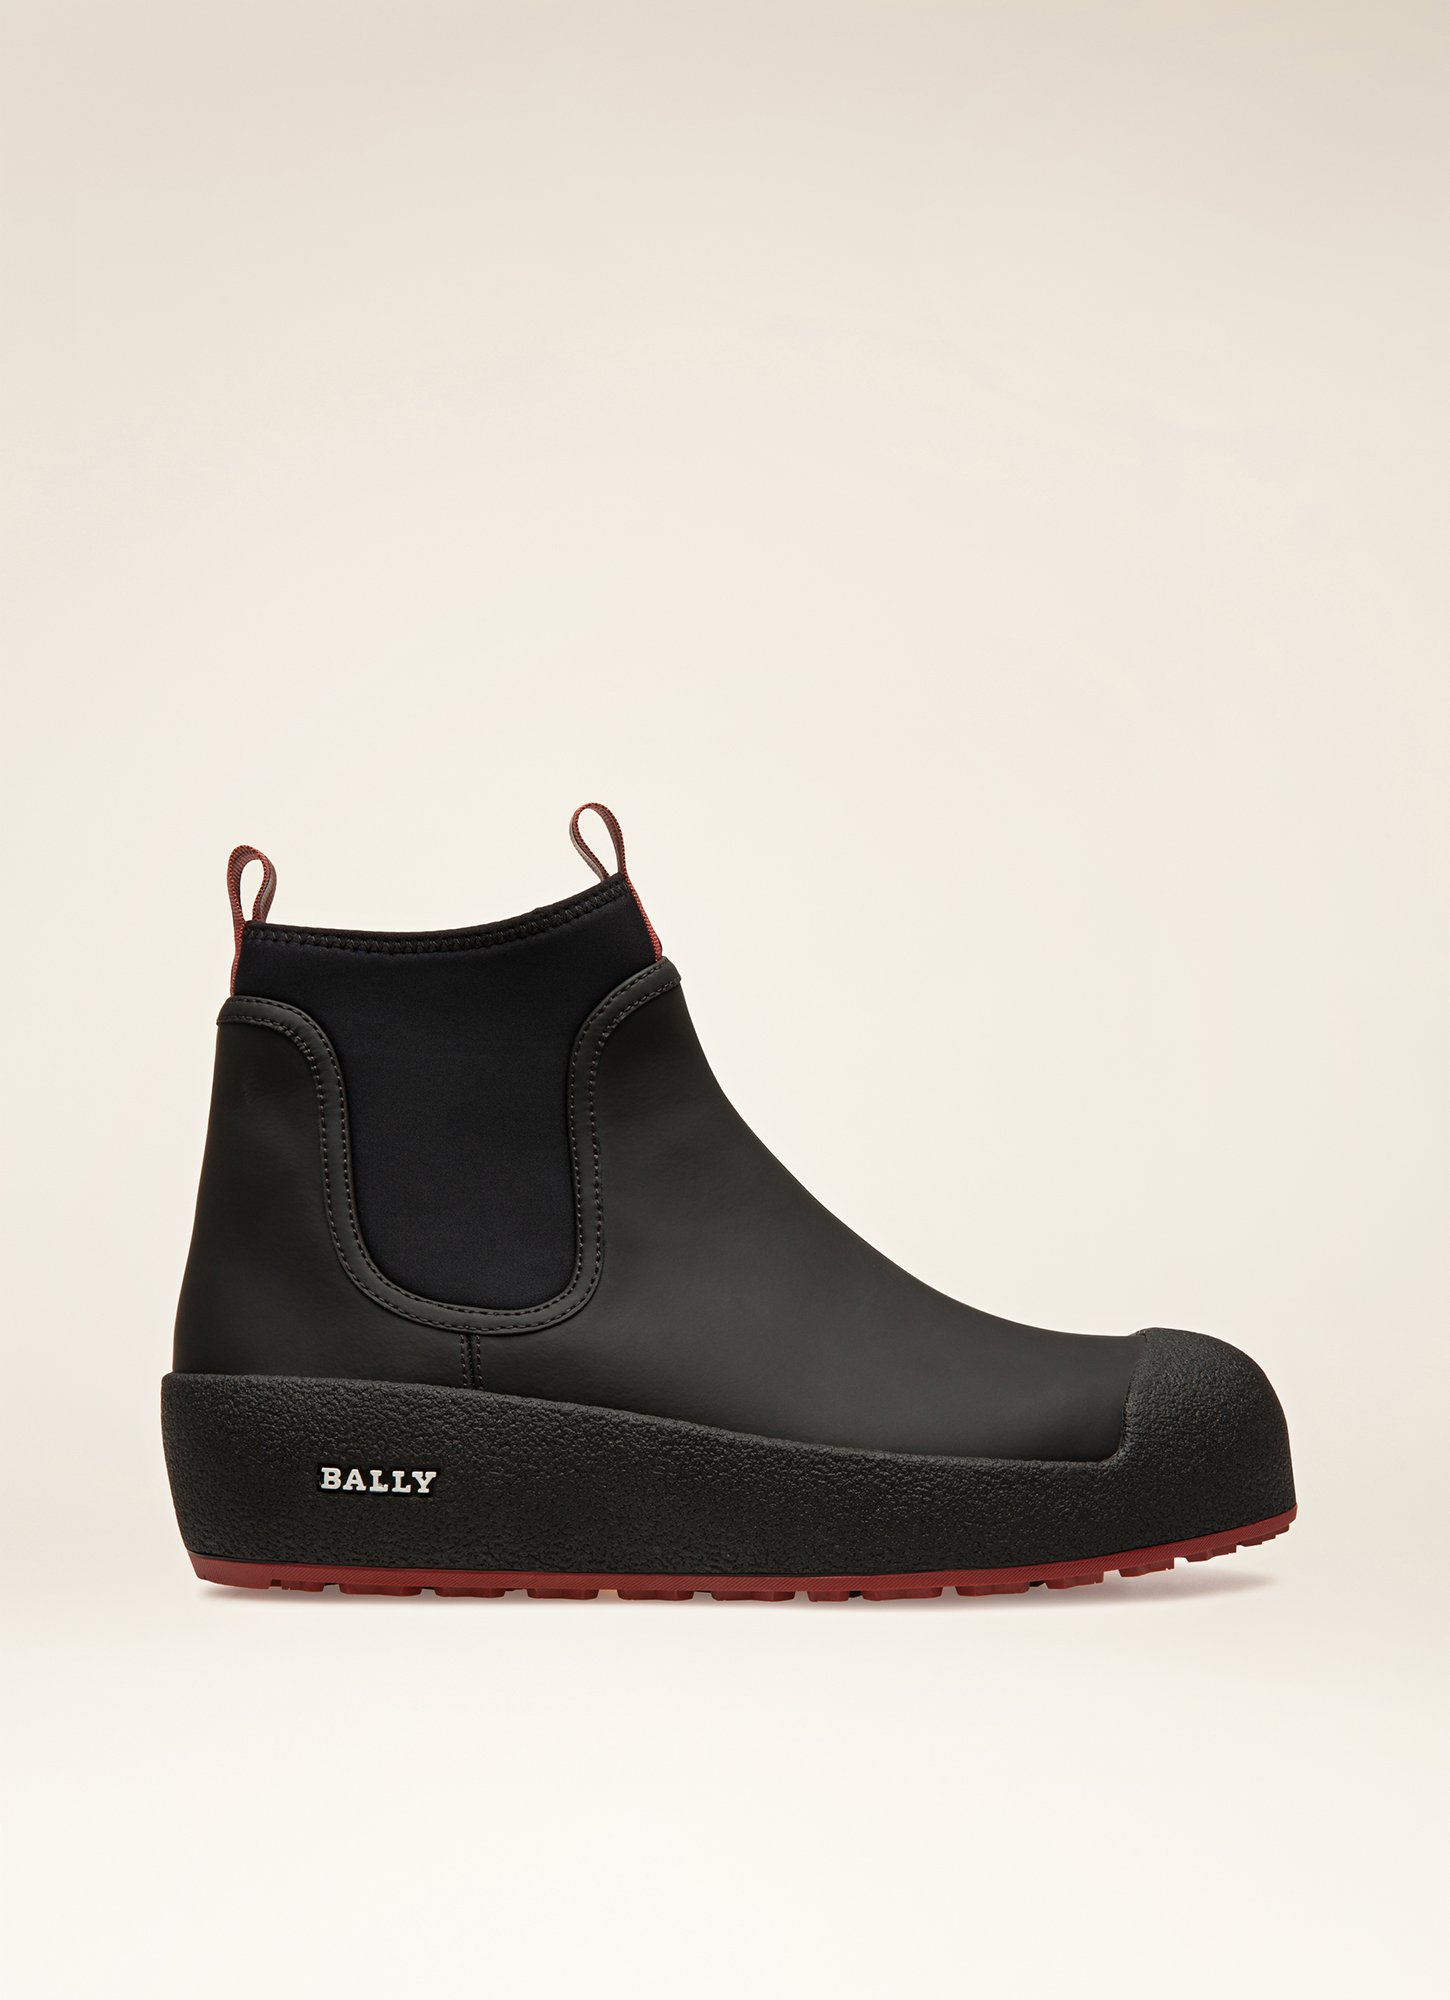 Cubrid | Mens Snow Boots | Black Leather | Bally